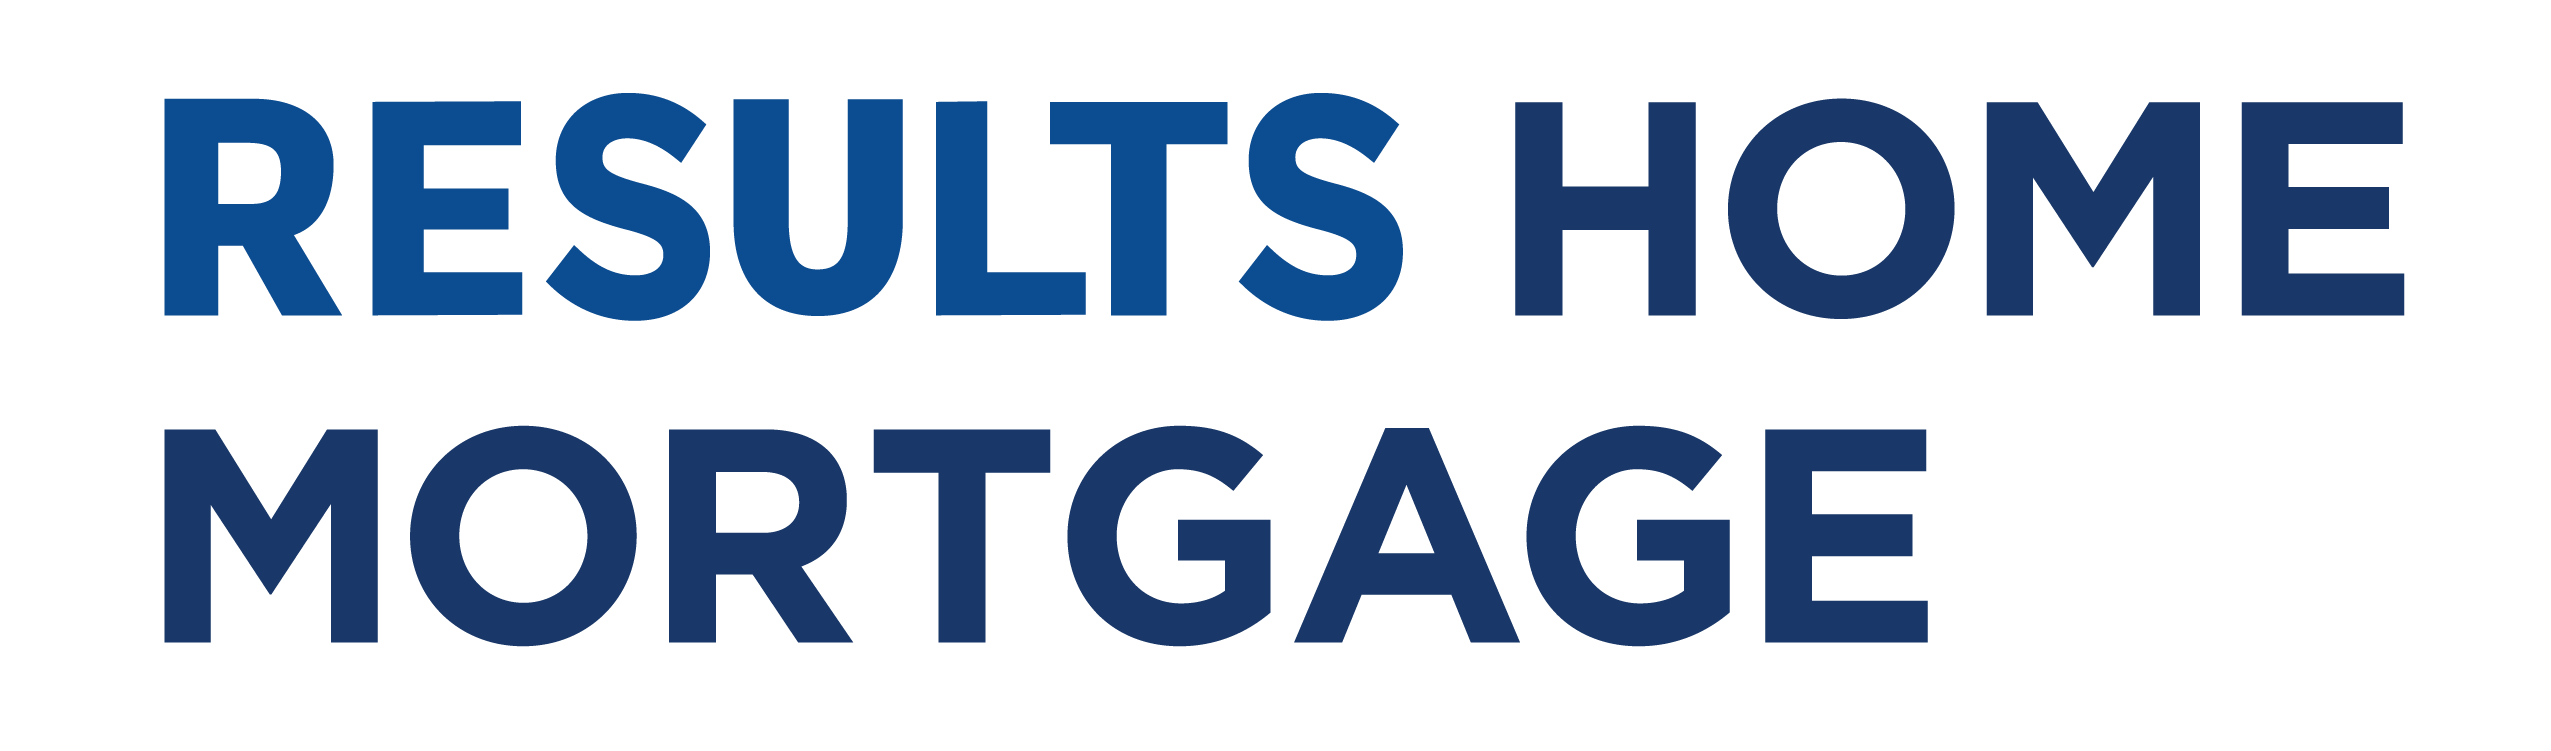 Results Home Mortgage Logo